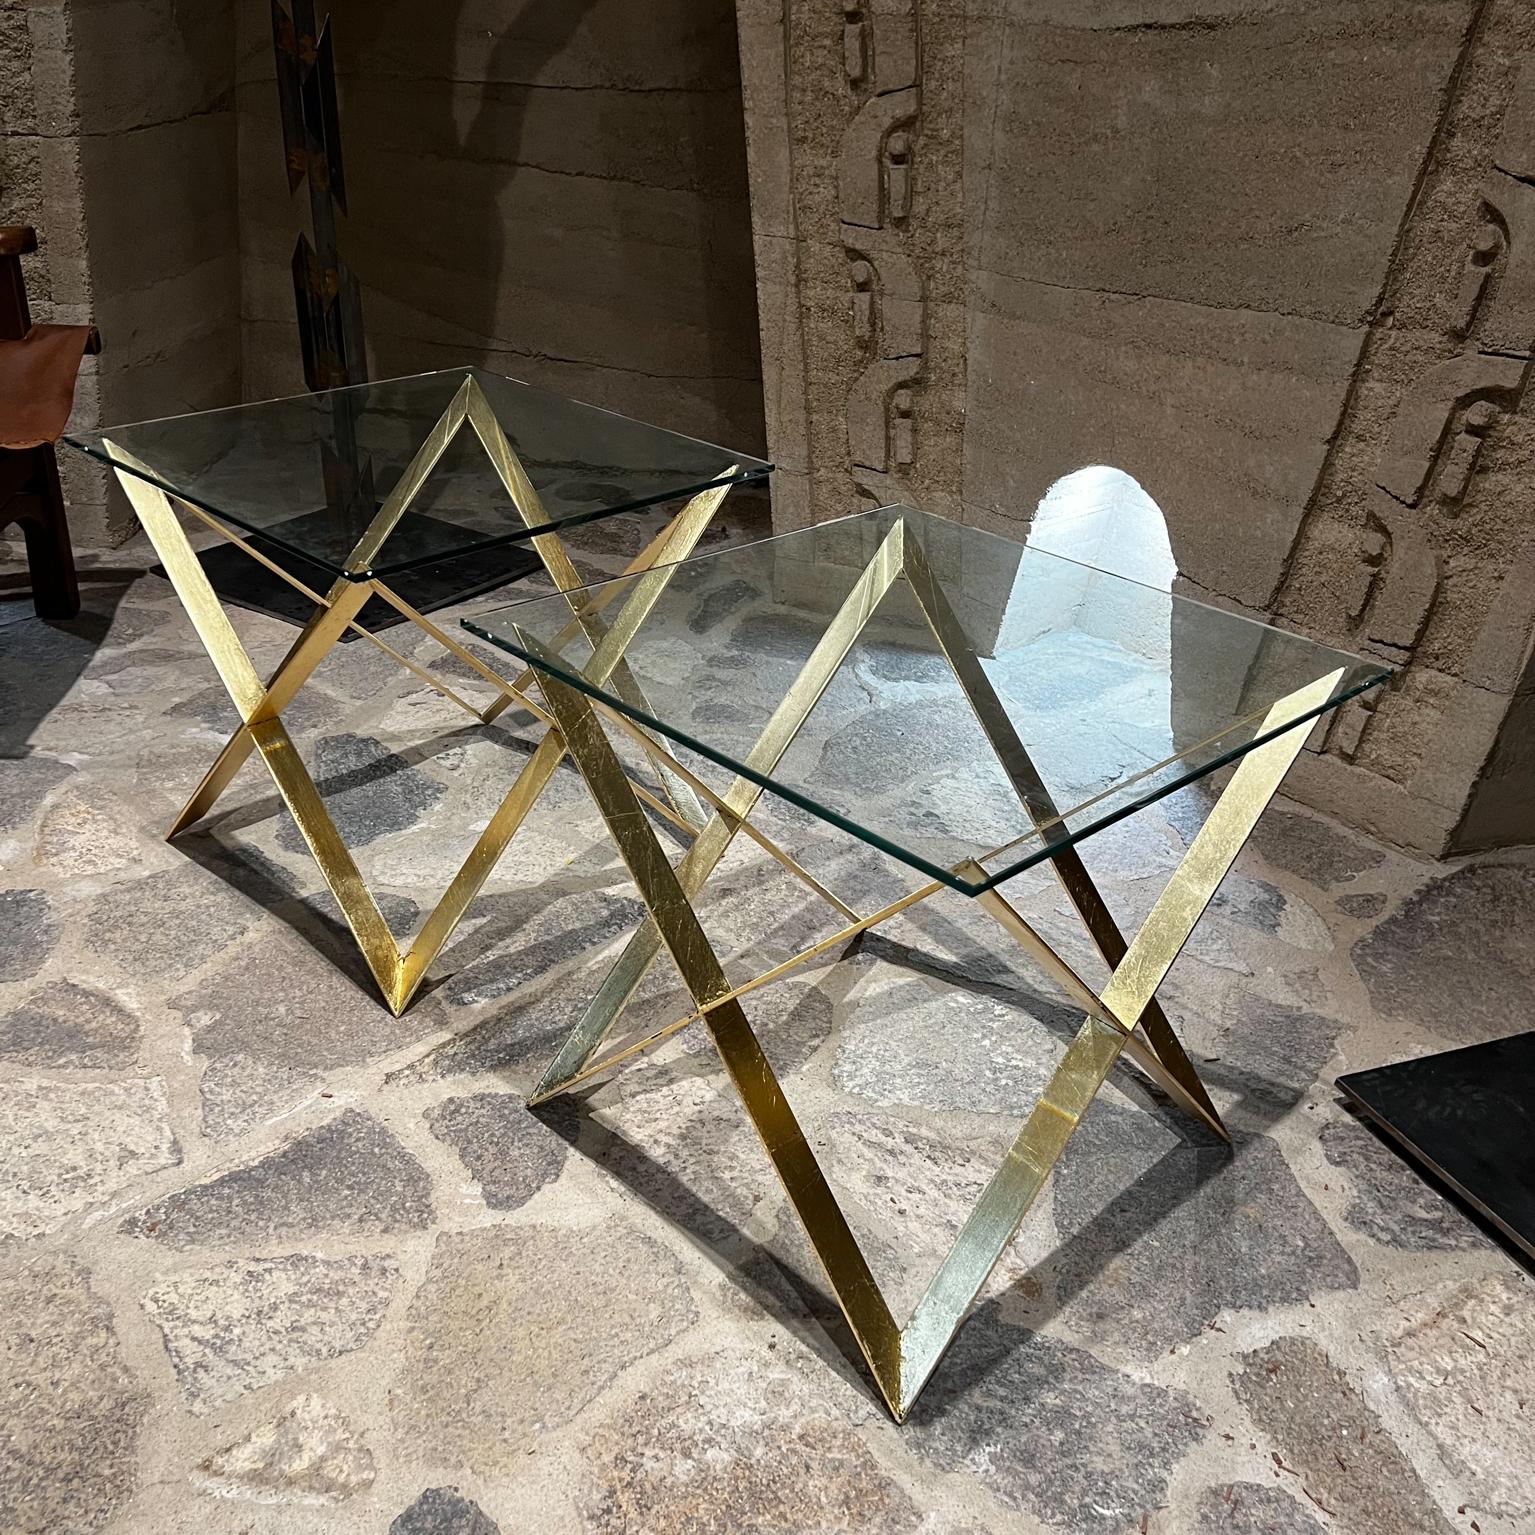 1960s Arturo Pani Stellar Glass on Gold Leaf Side Tables Mexico City In Good Condition For Sale In Chula Vista, CA